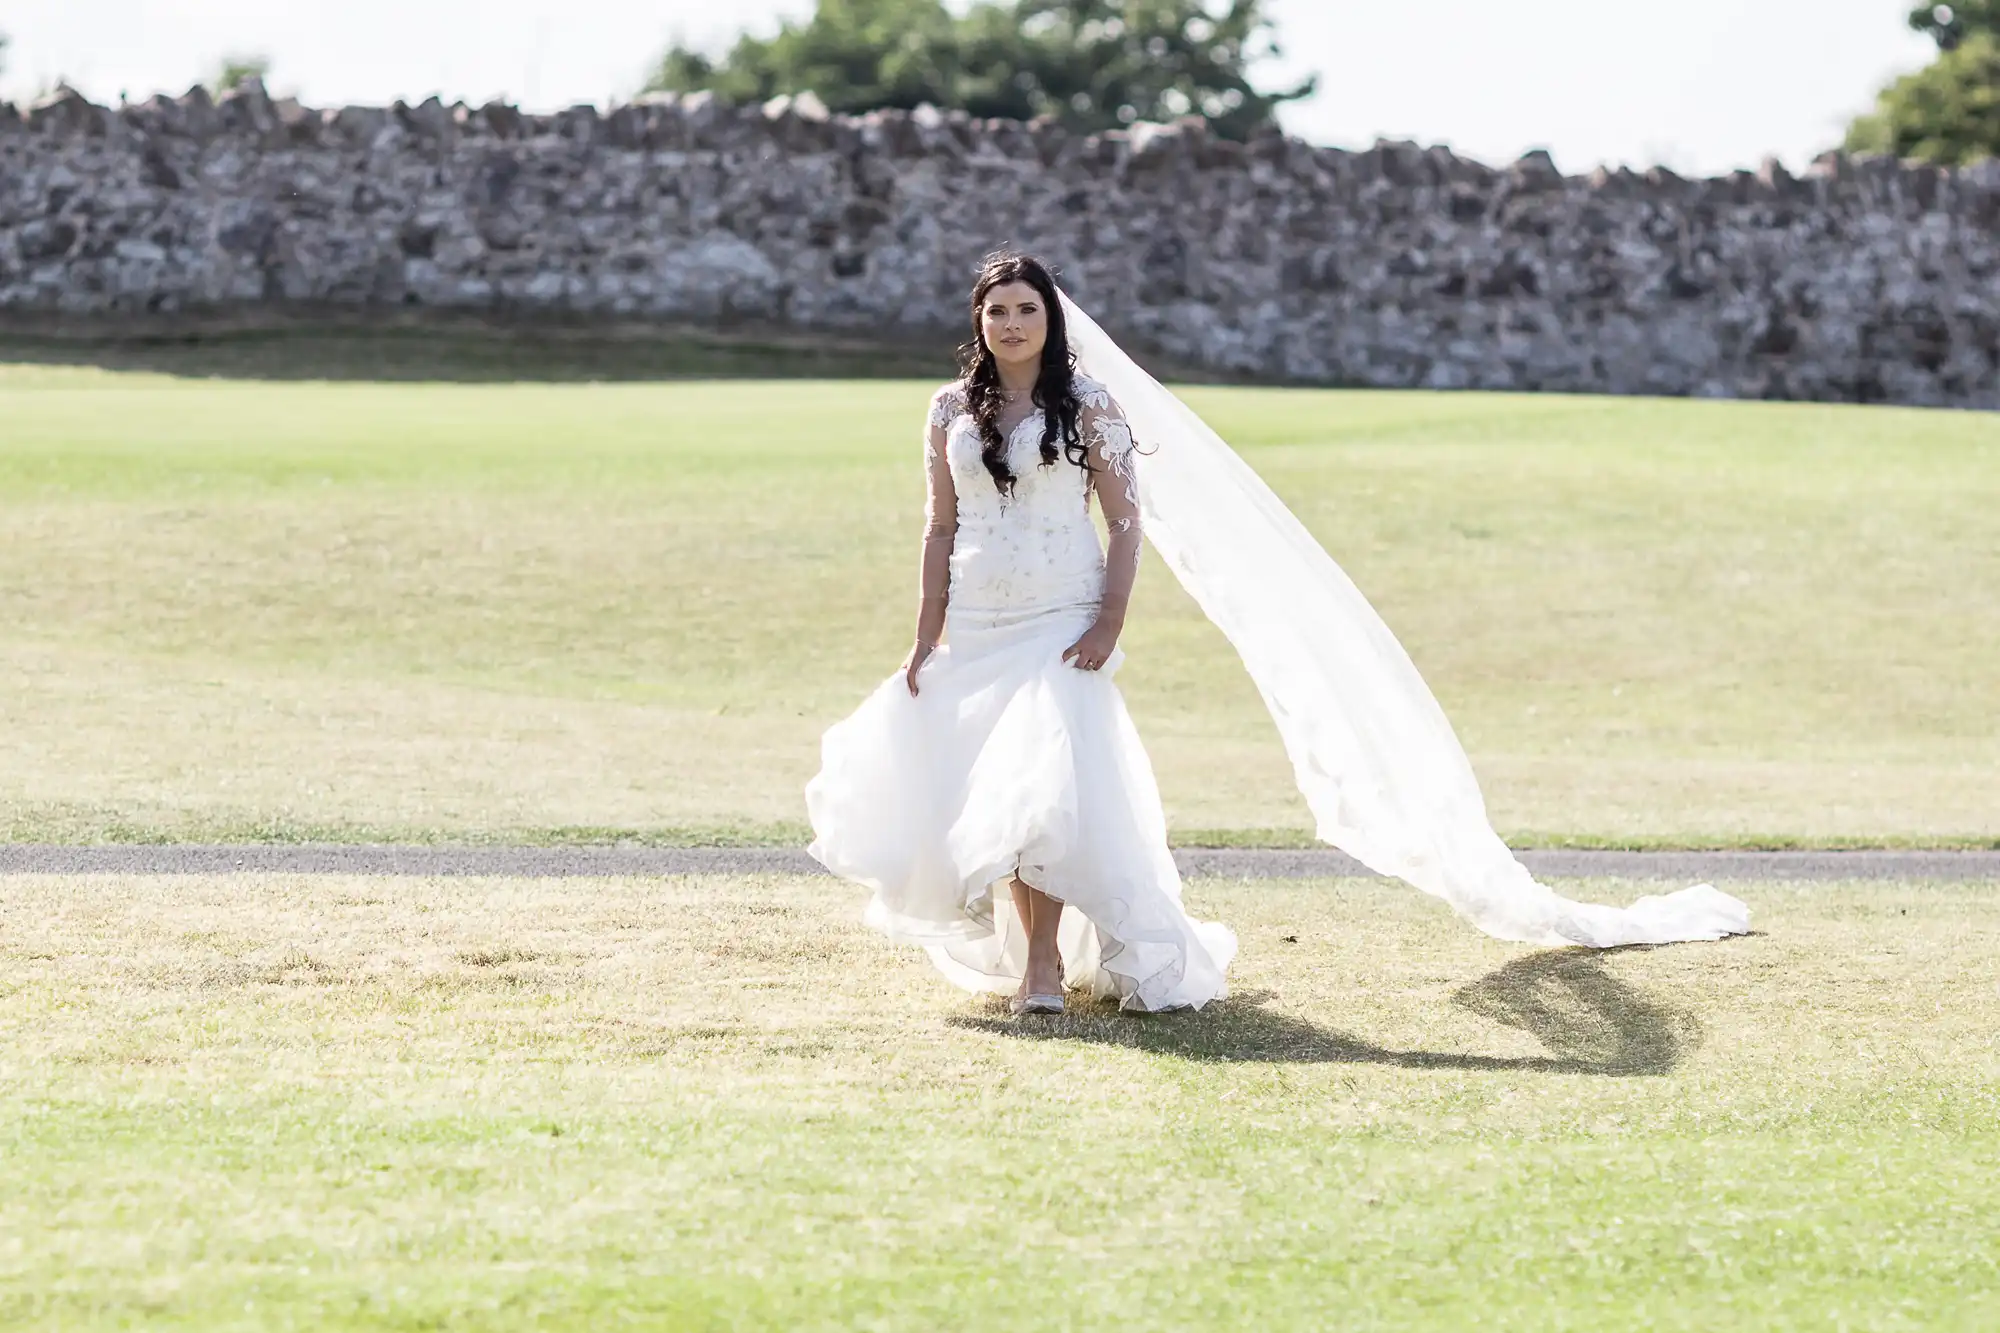 A bride in a white dress with a long veil walks across a grassy field, with an old stone wall in the background.